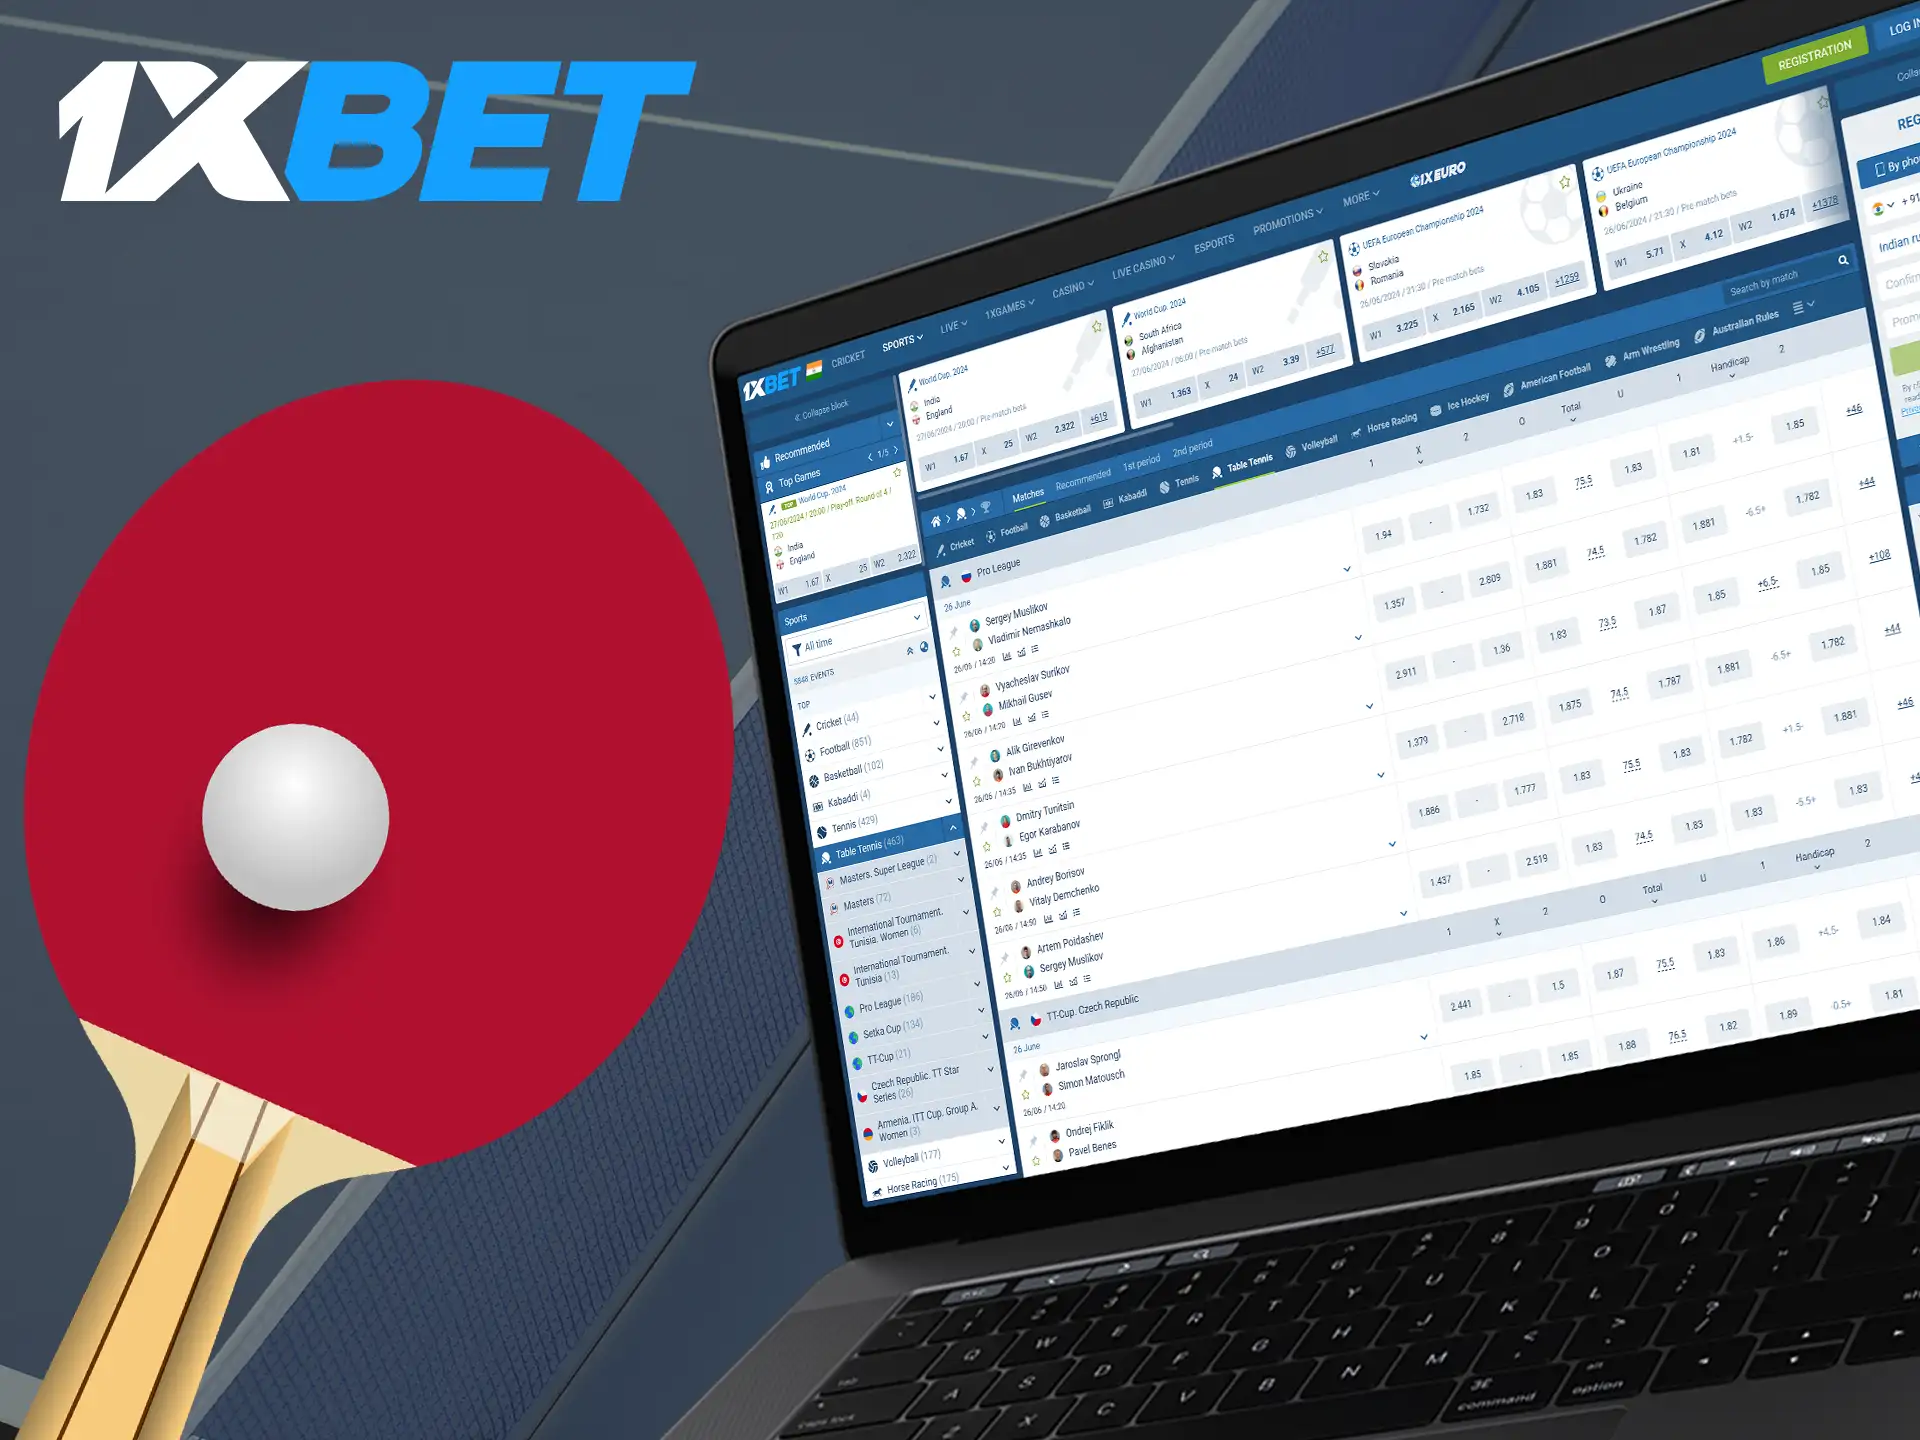 Numerous table tennis matches are available for betting at 1xBet.